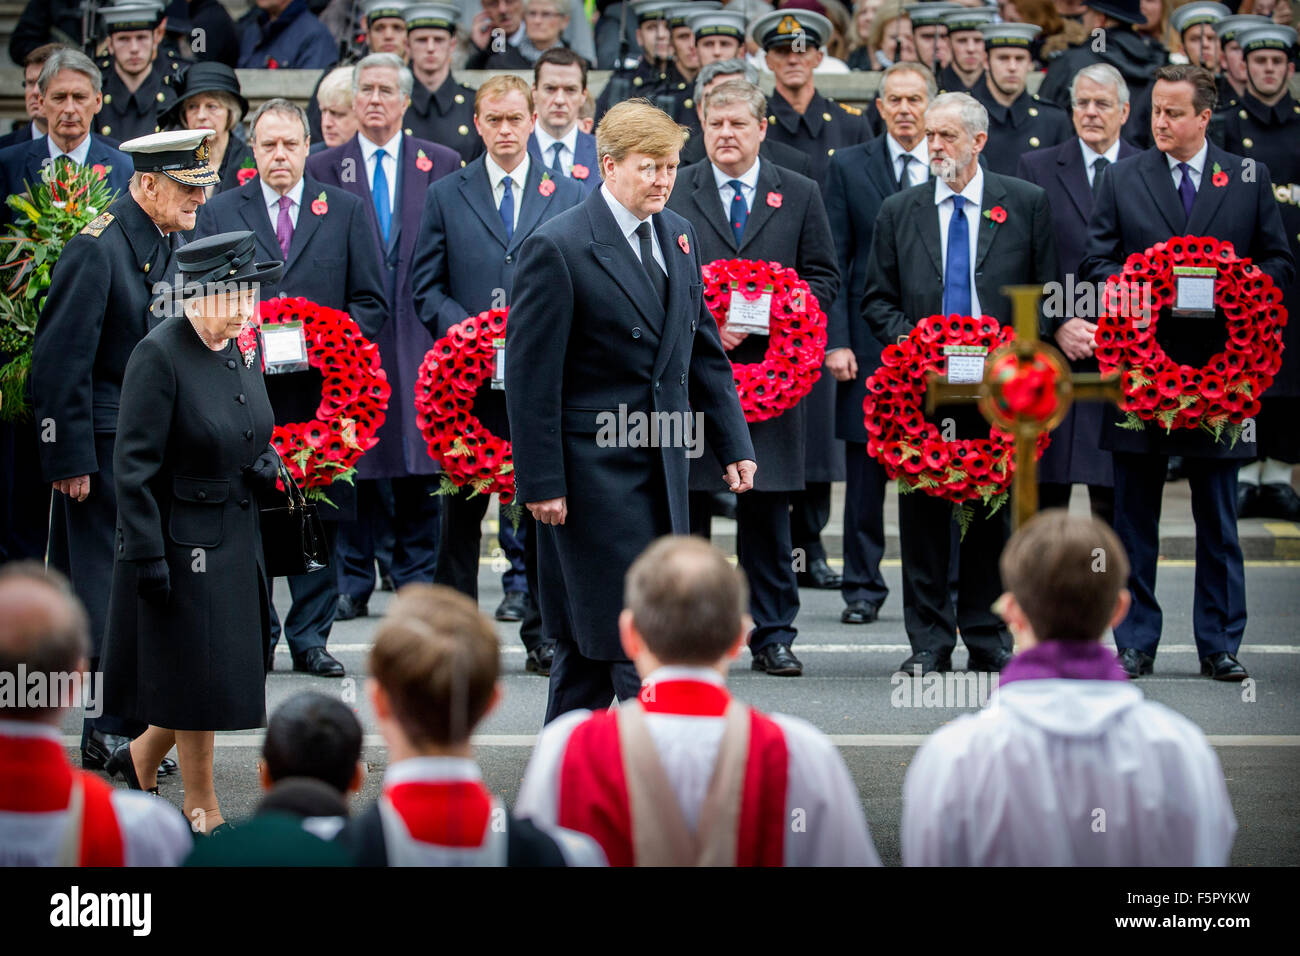 London, UK. 08th Nov, 2015. Britain's Prince Philip (L-R), Duke of Edinburgh, Queen Elizabeth II and King Willem-Alexander of The Netherlands during the Remembrance Sunday ceremony at the Cenotaph in London, Britain, 08 November 2015. Britain observed the annual Remembrance Day on 08 November, in memory of the war dead. Photo: Patrick van Katwijk/dpa/Alamy Live News Stock Photo